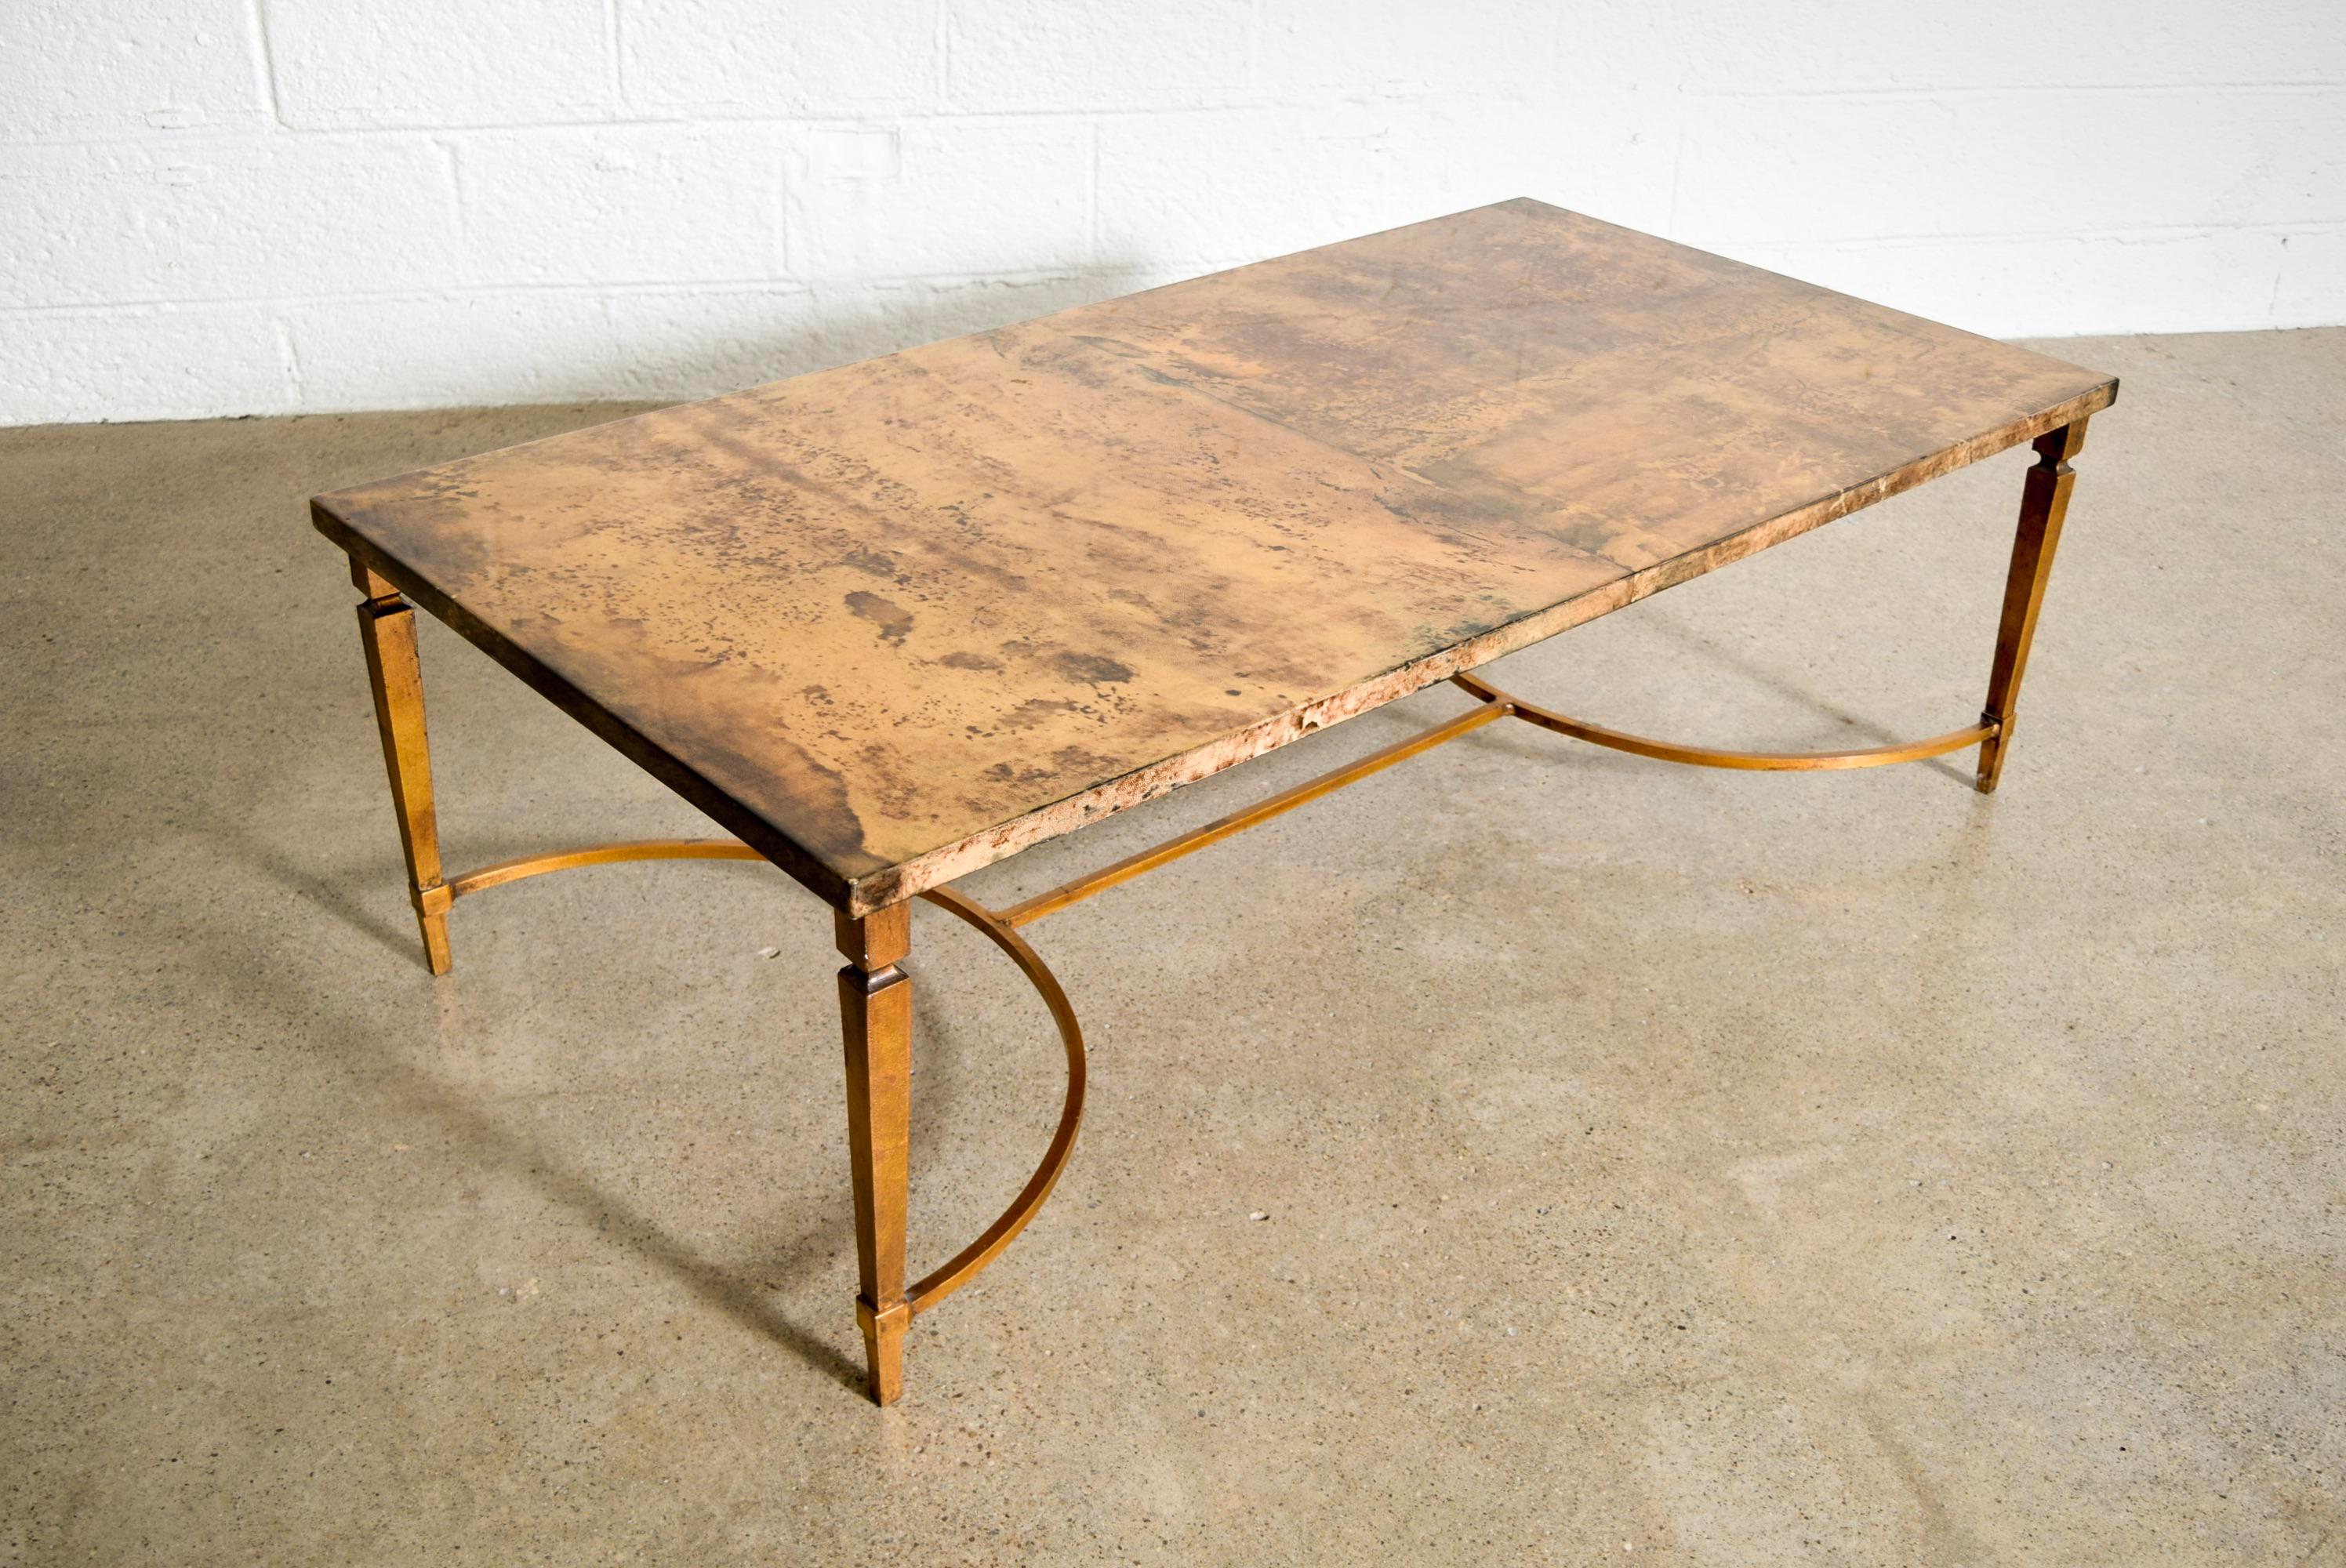 Midcentury Italian Modern Aldo Tura Goatskin Leather Cocktail Coffee Table In Good Condition For Sale In Detroit, MI